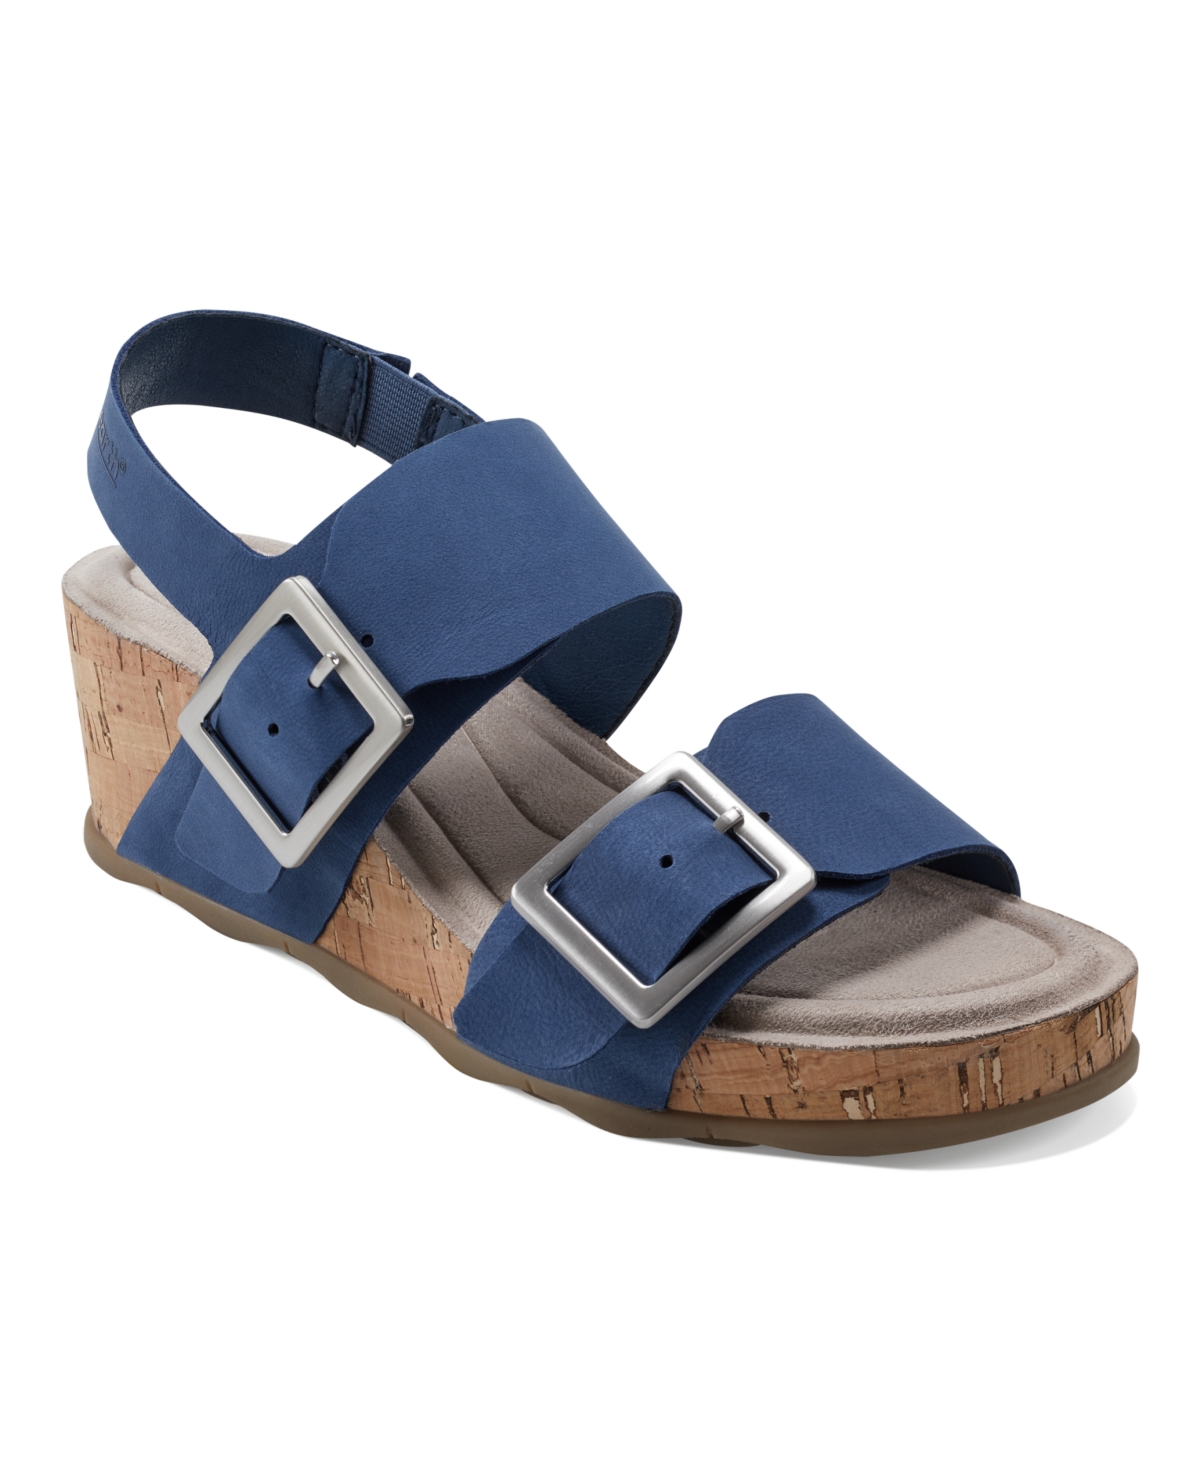 Earth Women's Willa Strappy Casual Mid Cork Wedge Sandals - Light Natural Leather